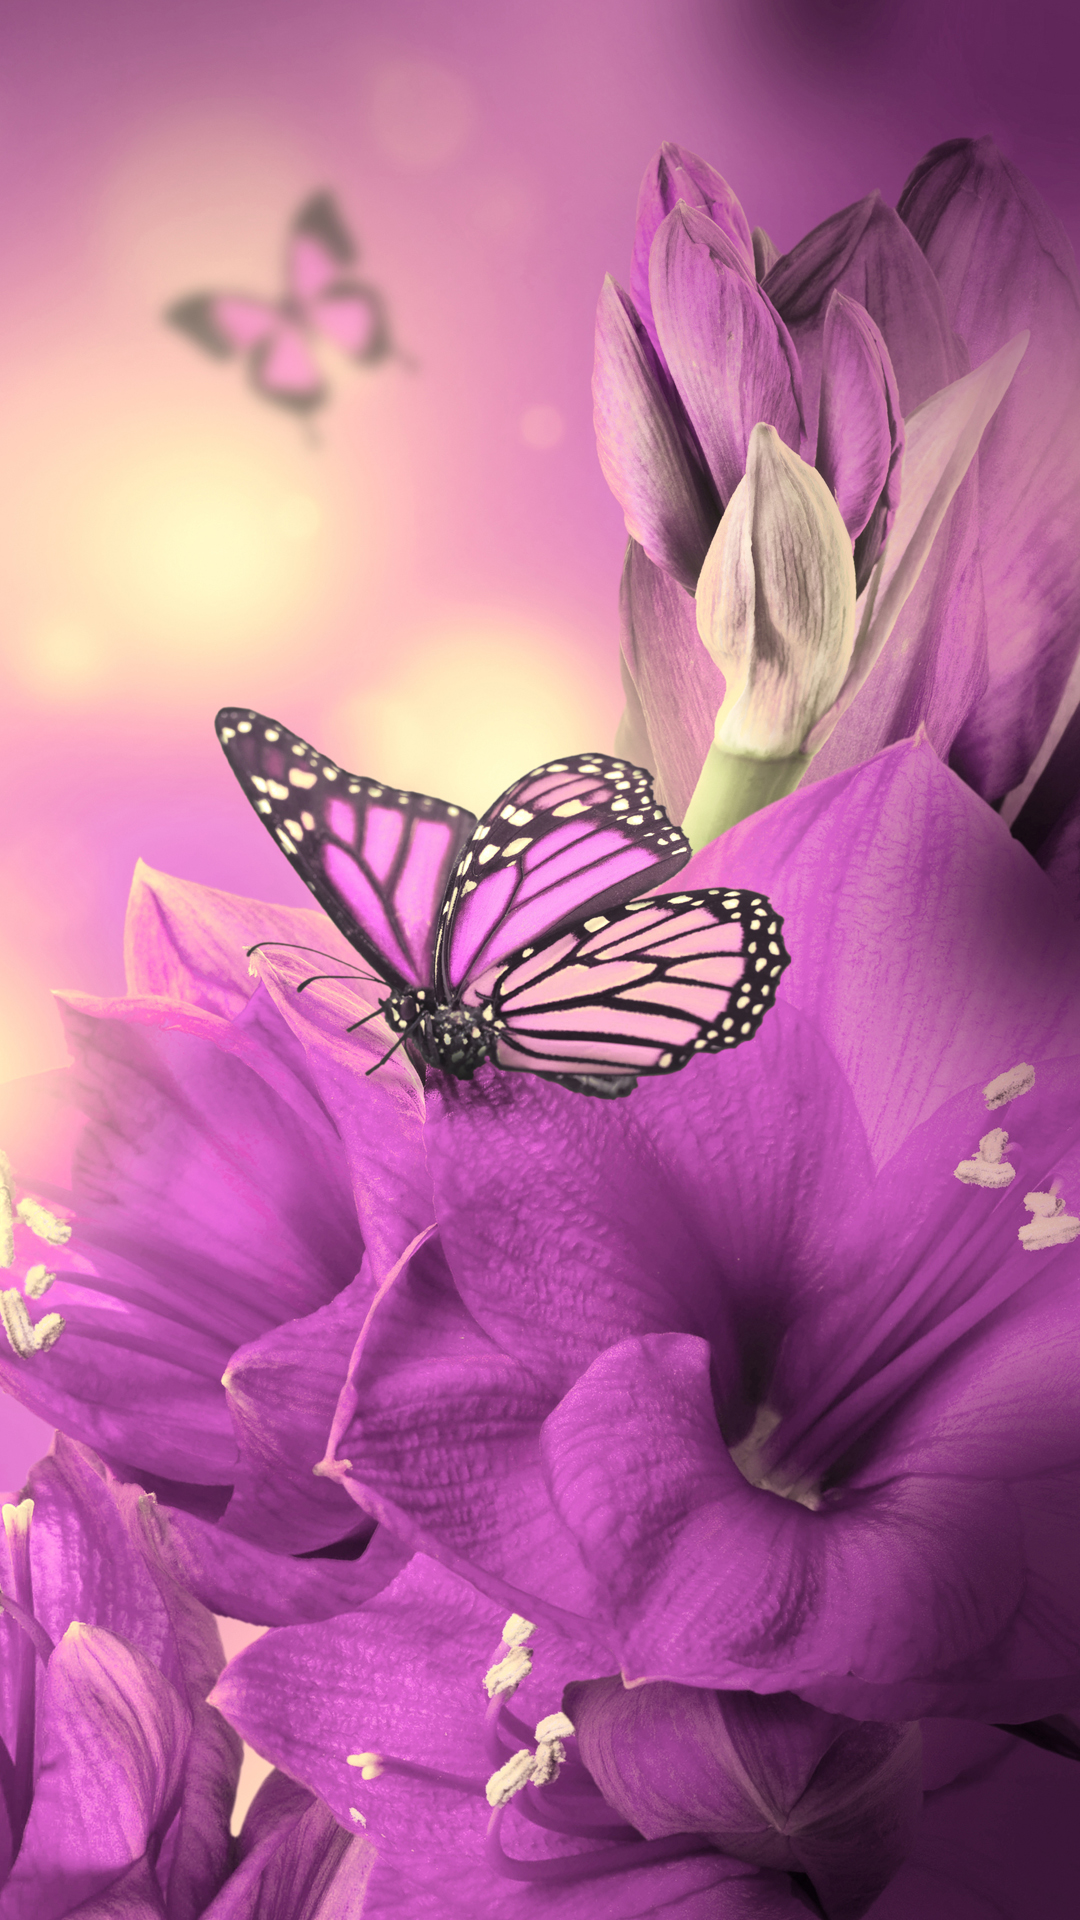 butterfly live wallpaper,butterfly,purple,violet,insect,flower